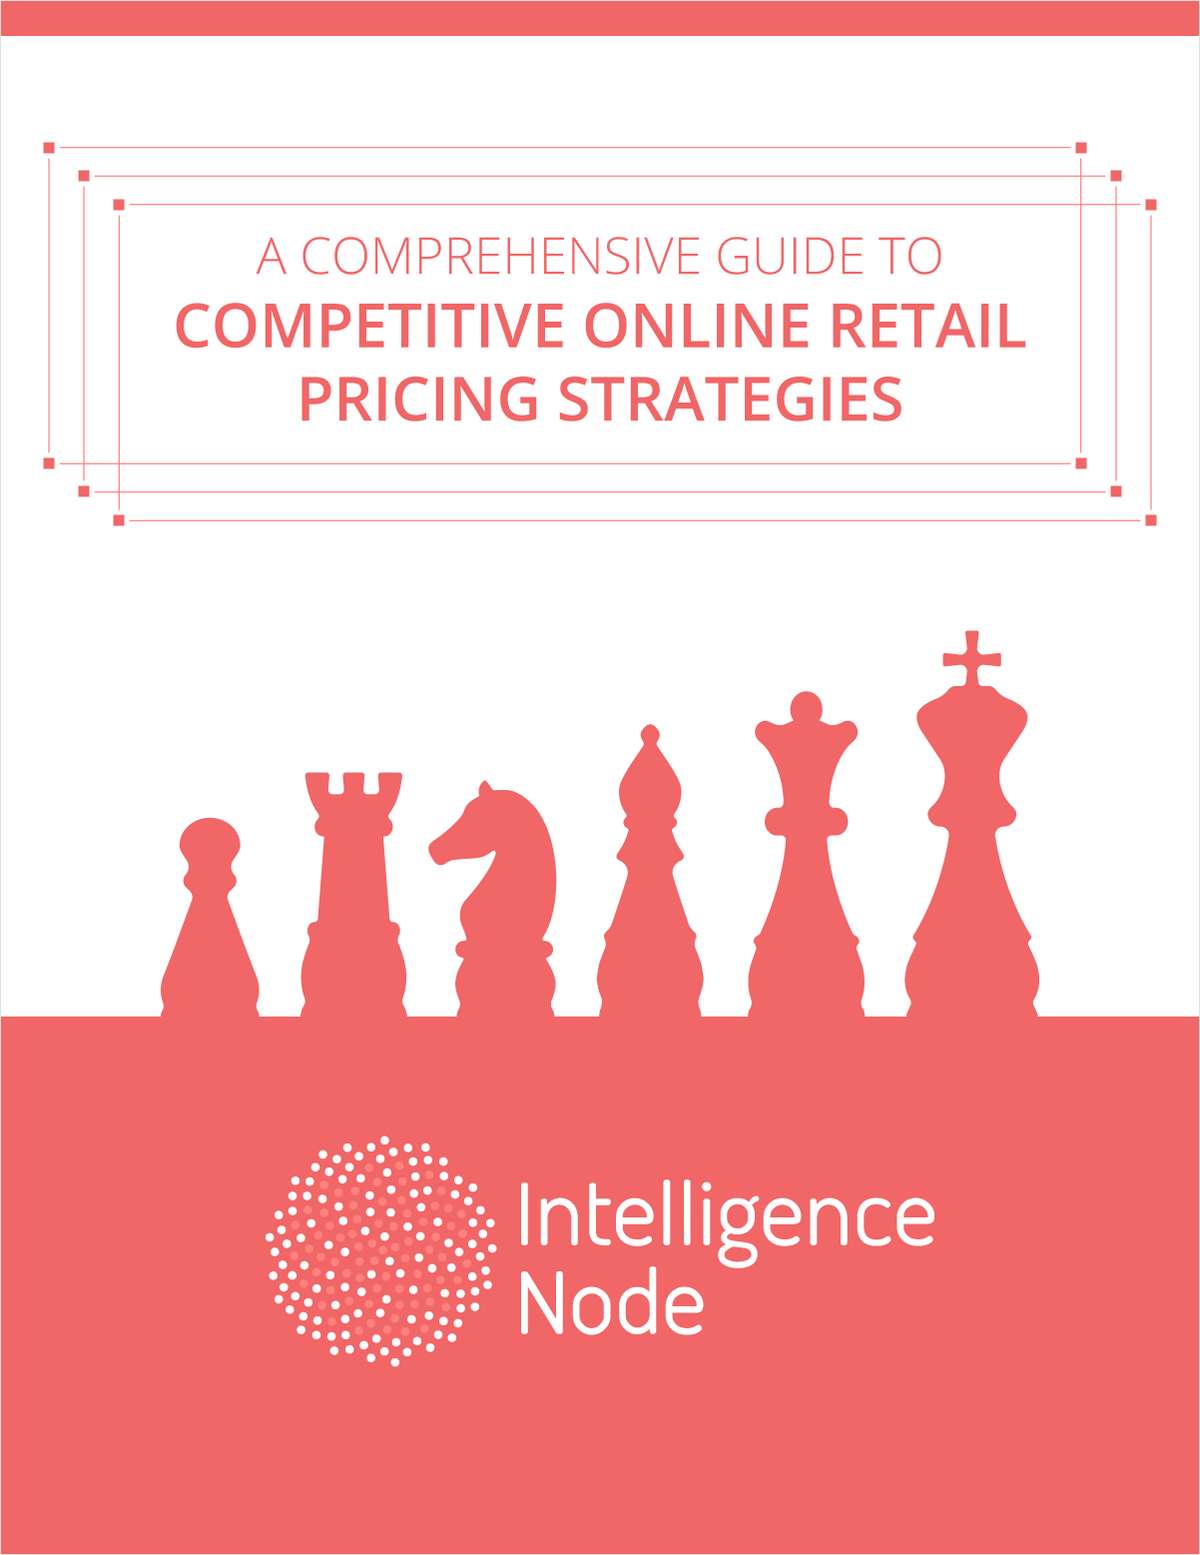 A Comprehensive Guide To Competitive Online Retail Pricing Strategies